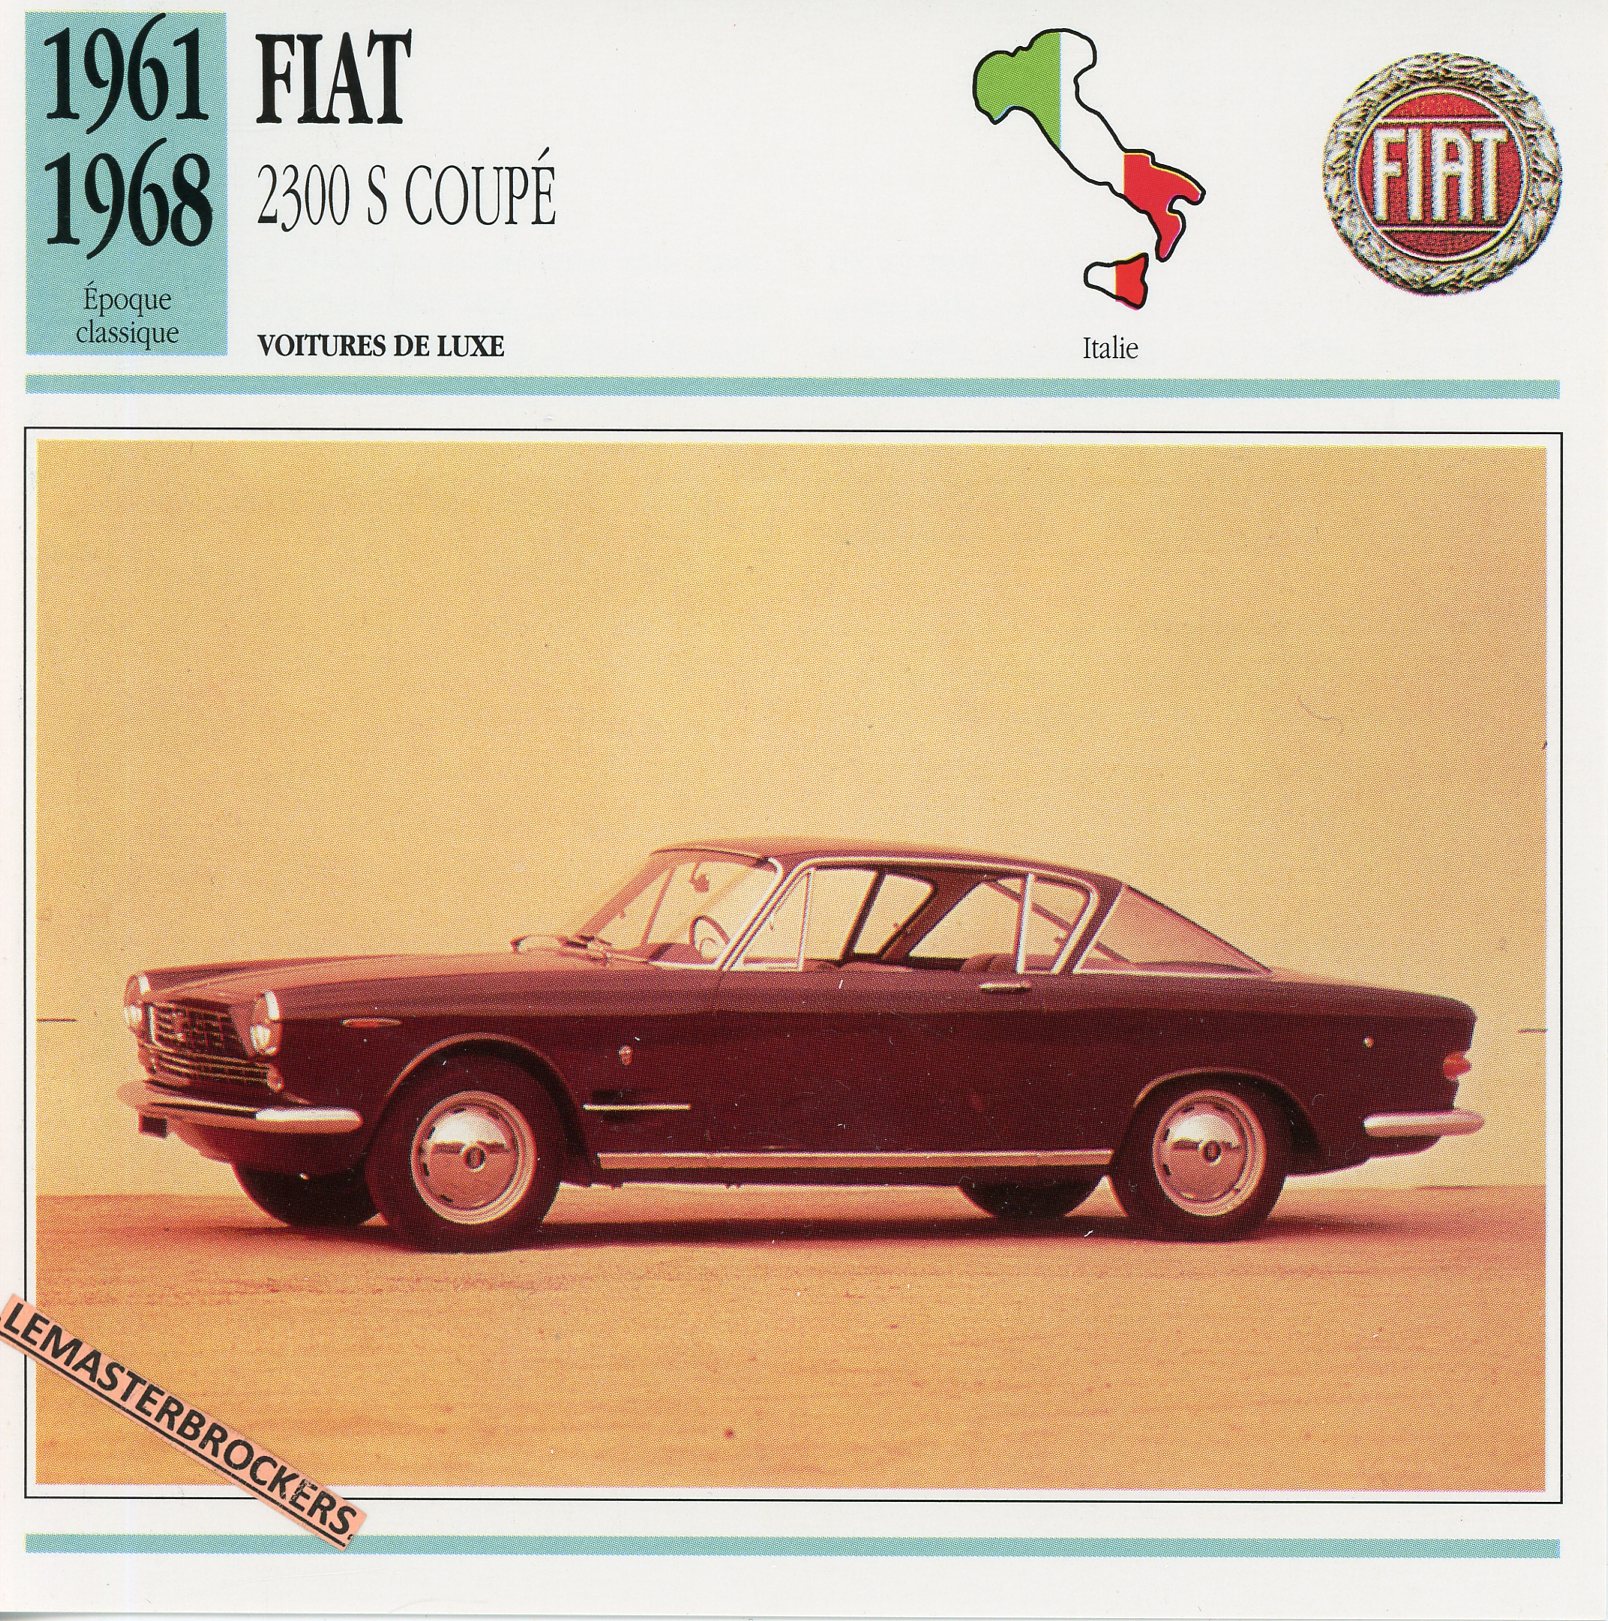 FICHE-FIAT-2300S-COUPE-LEMASTERBROCKERS-FICHE-AUTO-CARS-CARD-ATLAS-FRENCH